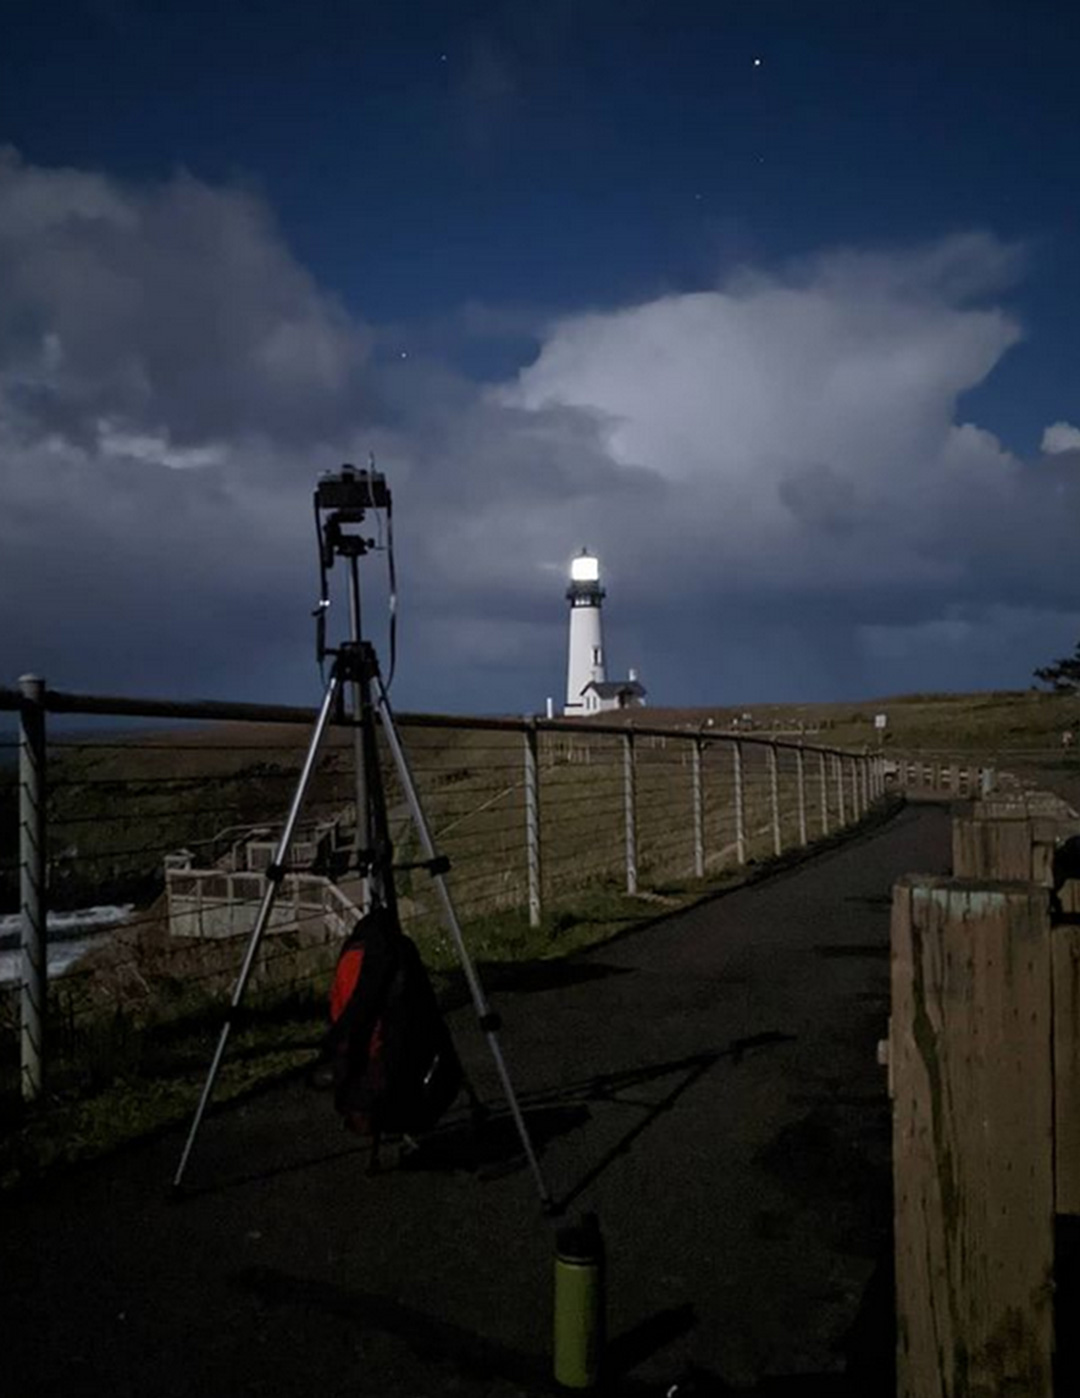 A behind the scenes shot showing my camera on its tripod with the lighthouse scene in the foreground.